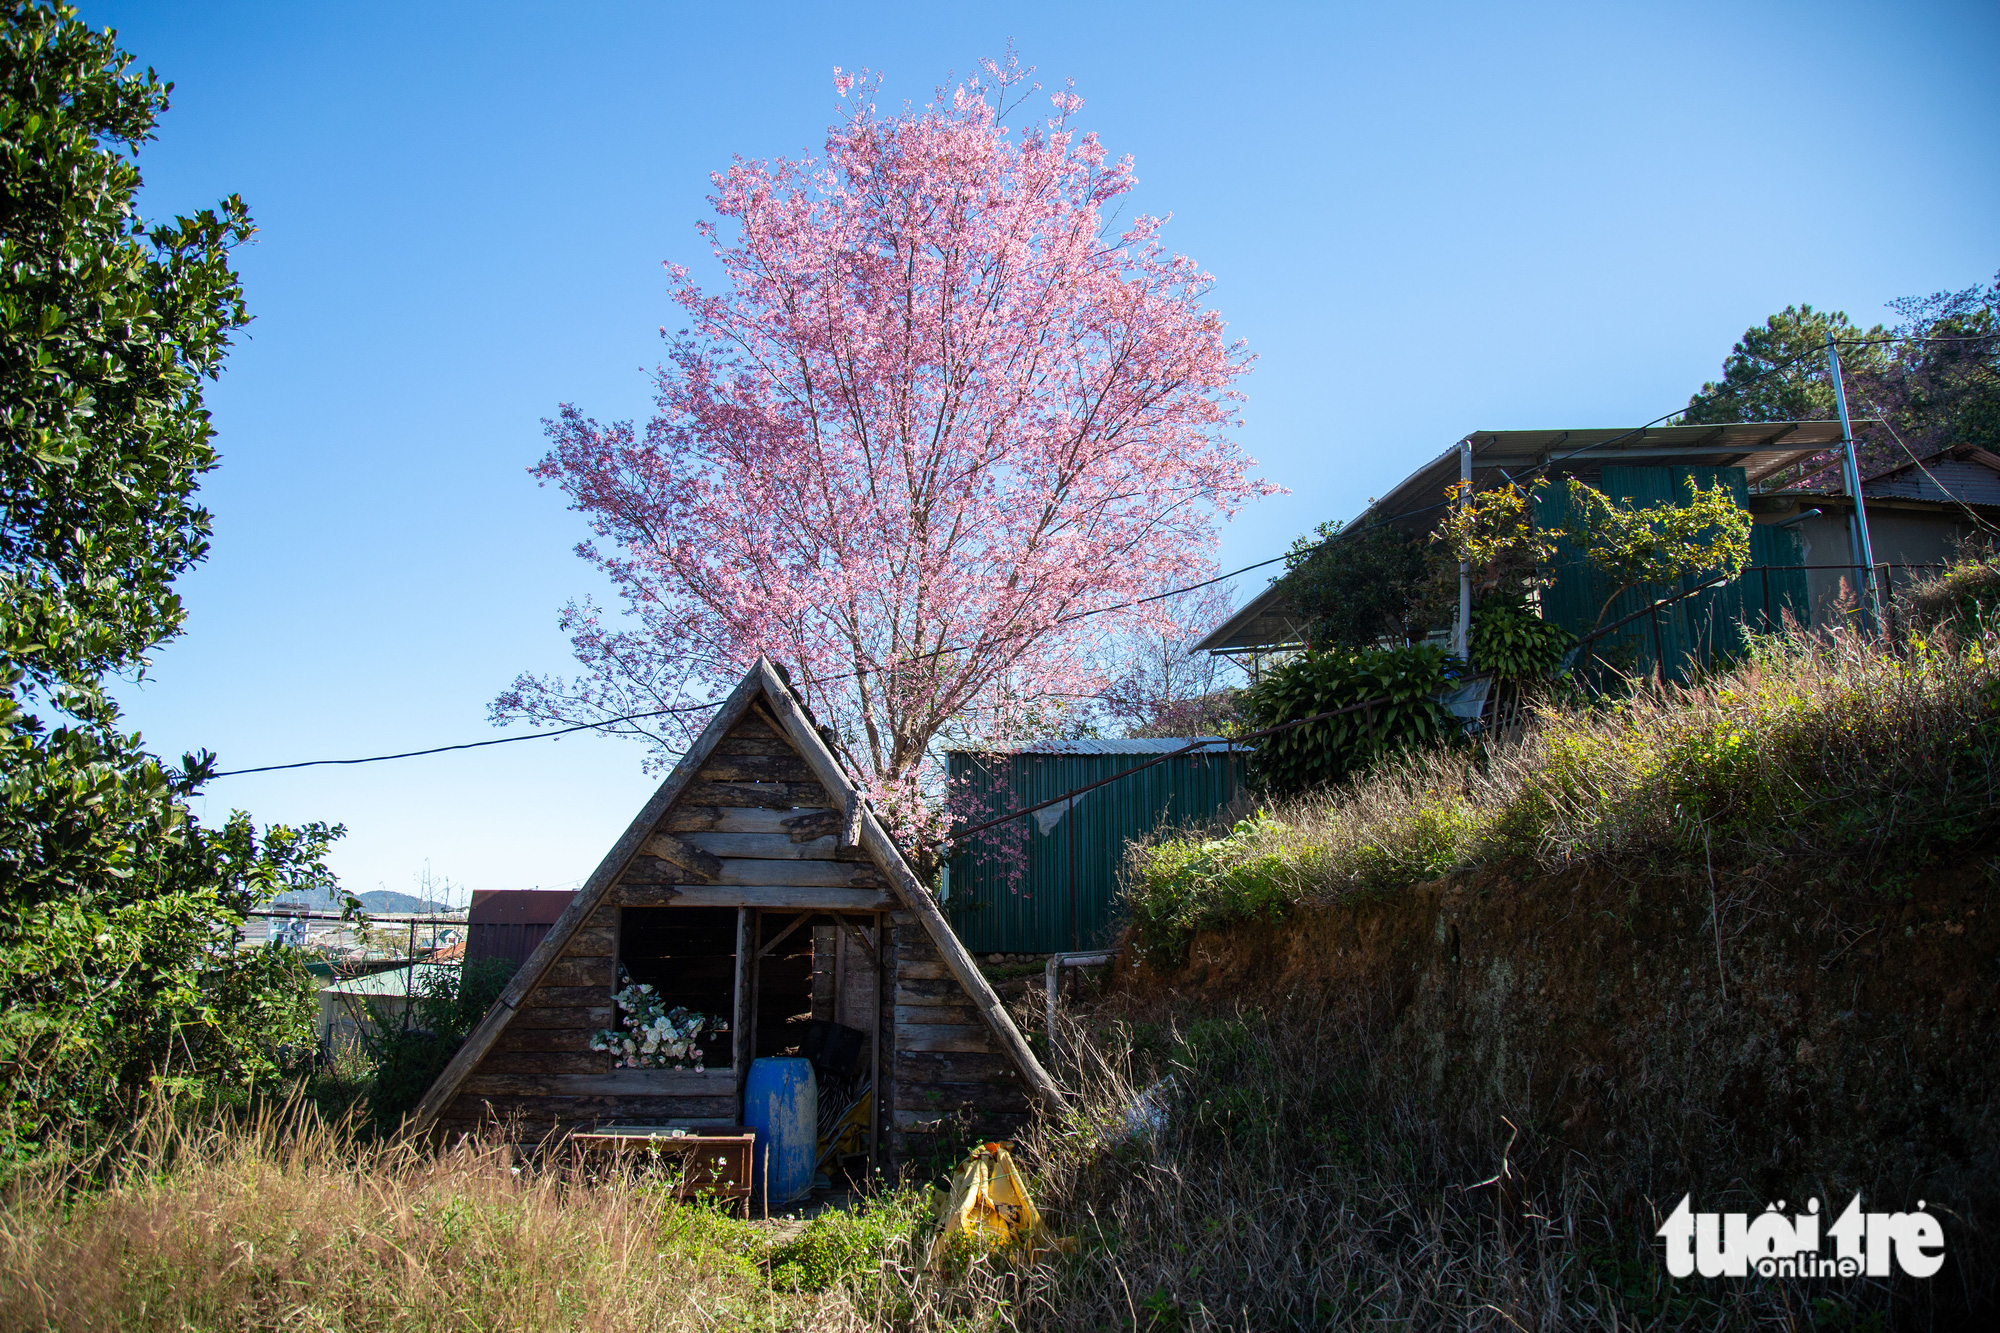 A blooming apricot tree by a wooden house in Da Lat City, Lam Dong Province, Vietnam. Photo: Tuoi Tre